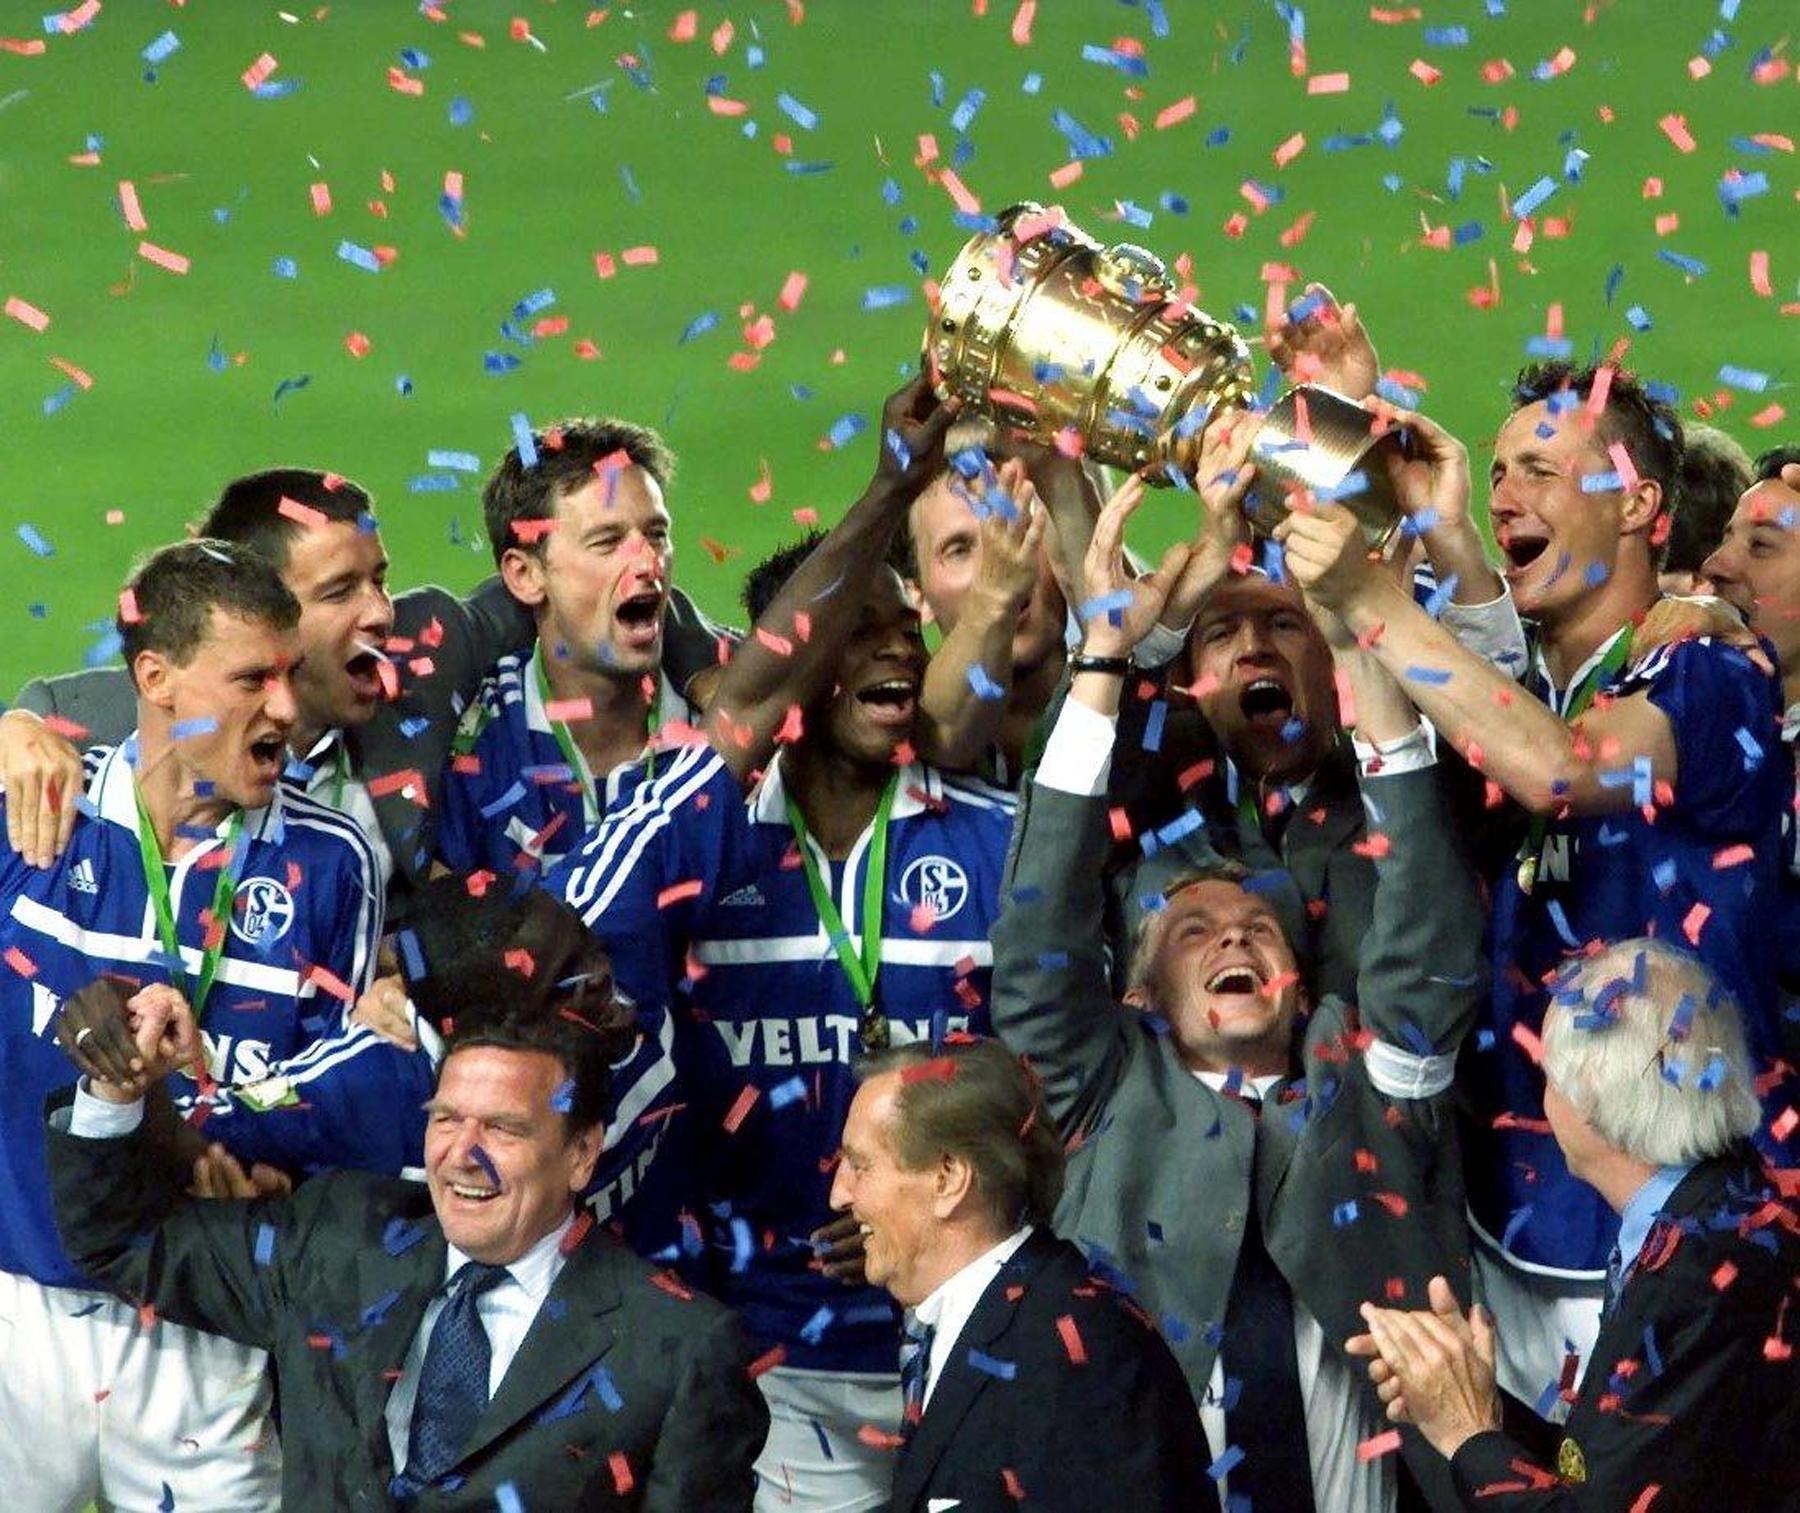 German Chancellor Gerhard Schroeder (L, foreground) and President of the German Football Federation (DFB) Gerhard Mayer-Vorfelder (C, foreground) celebrate with players of FC Schalke 04 who won the DFB Cup final Schalke vs Union Berlin 26 May 2001 in Berlin's Olympic stadium. Schalke won 2-0. AFP PHOTO EPA/DPA/WOLFGANG KUMM